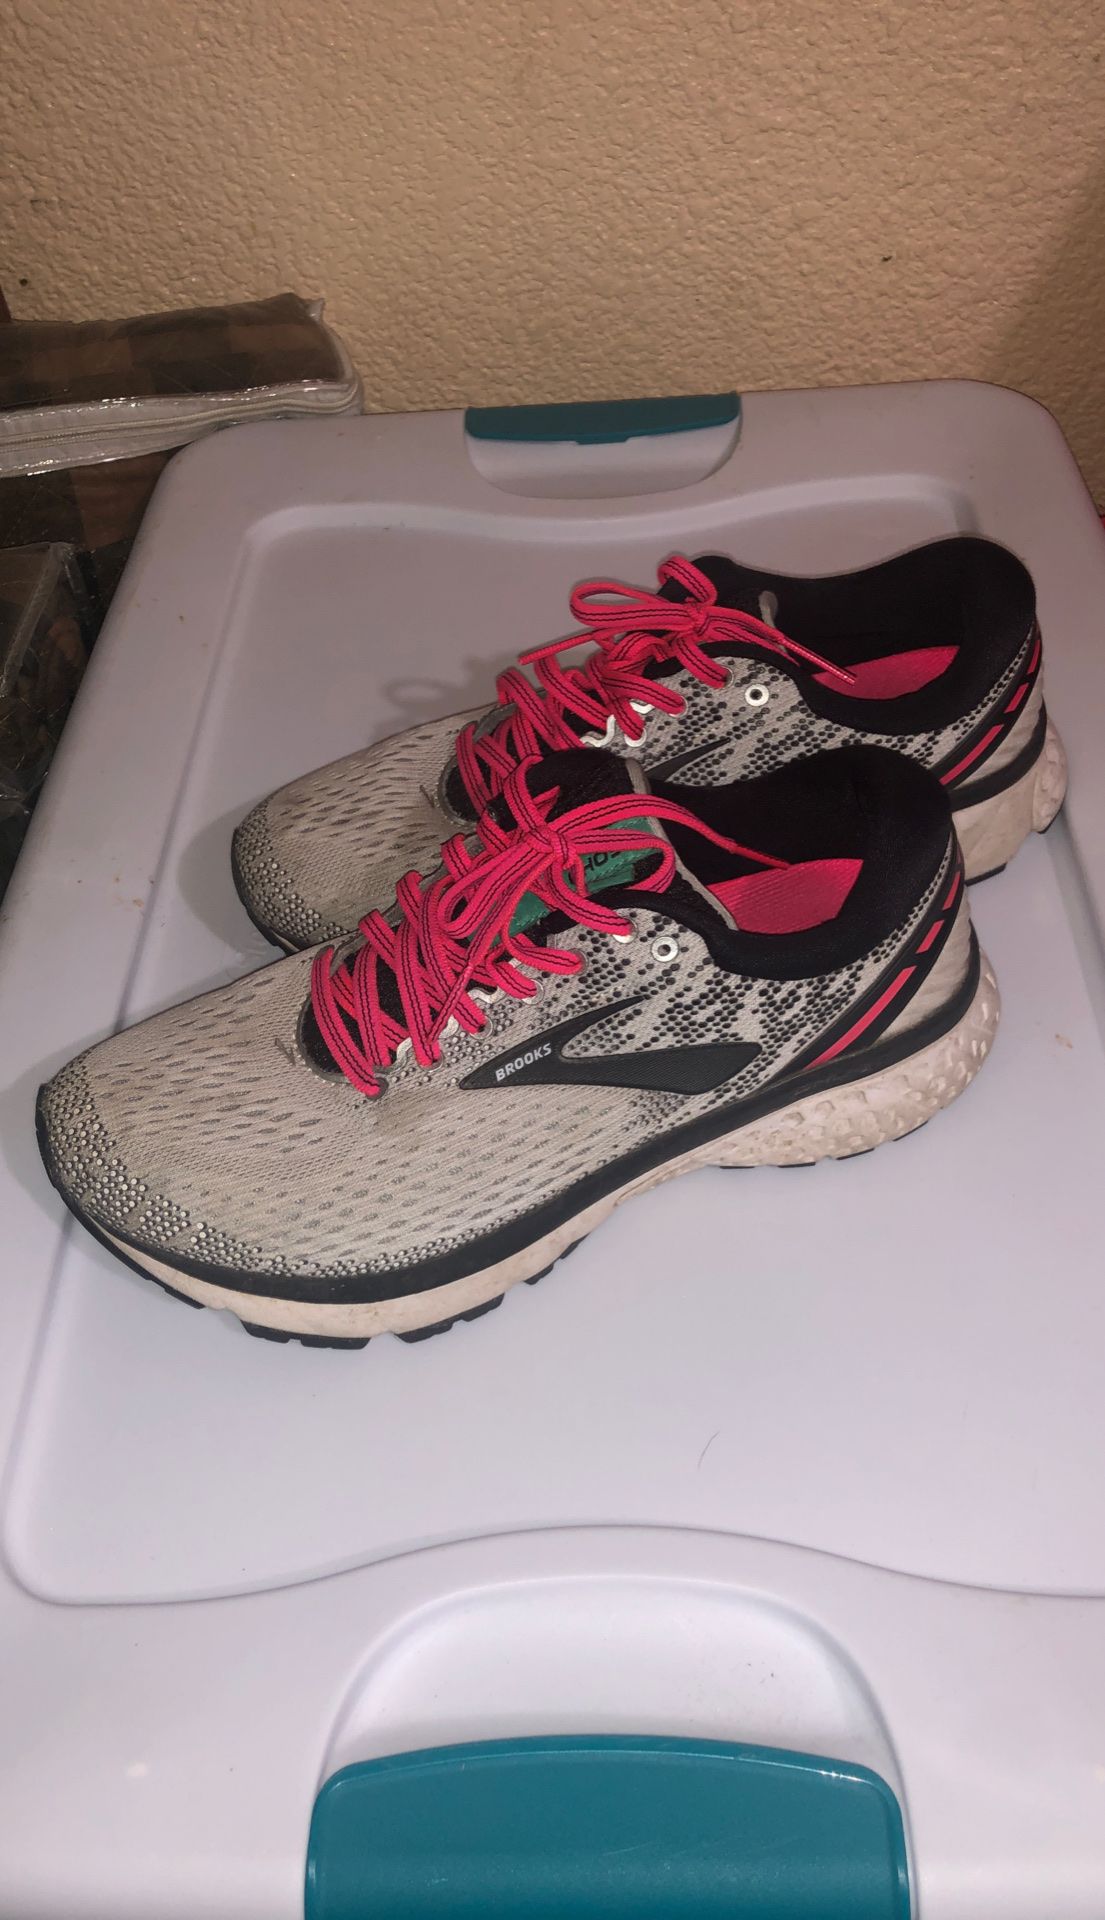 Brooks Ghost 11 woman’s running shoe size 8.5